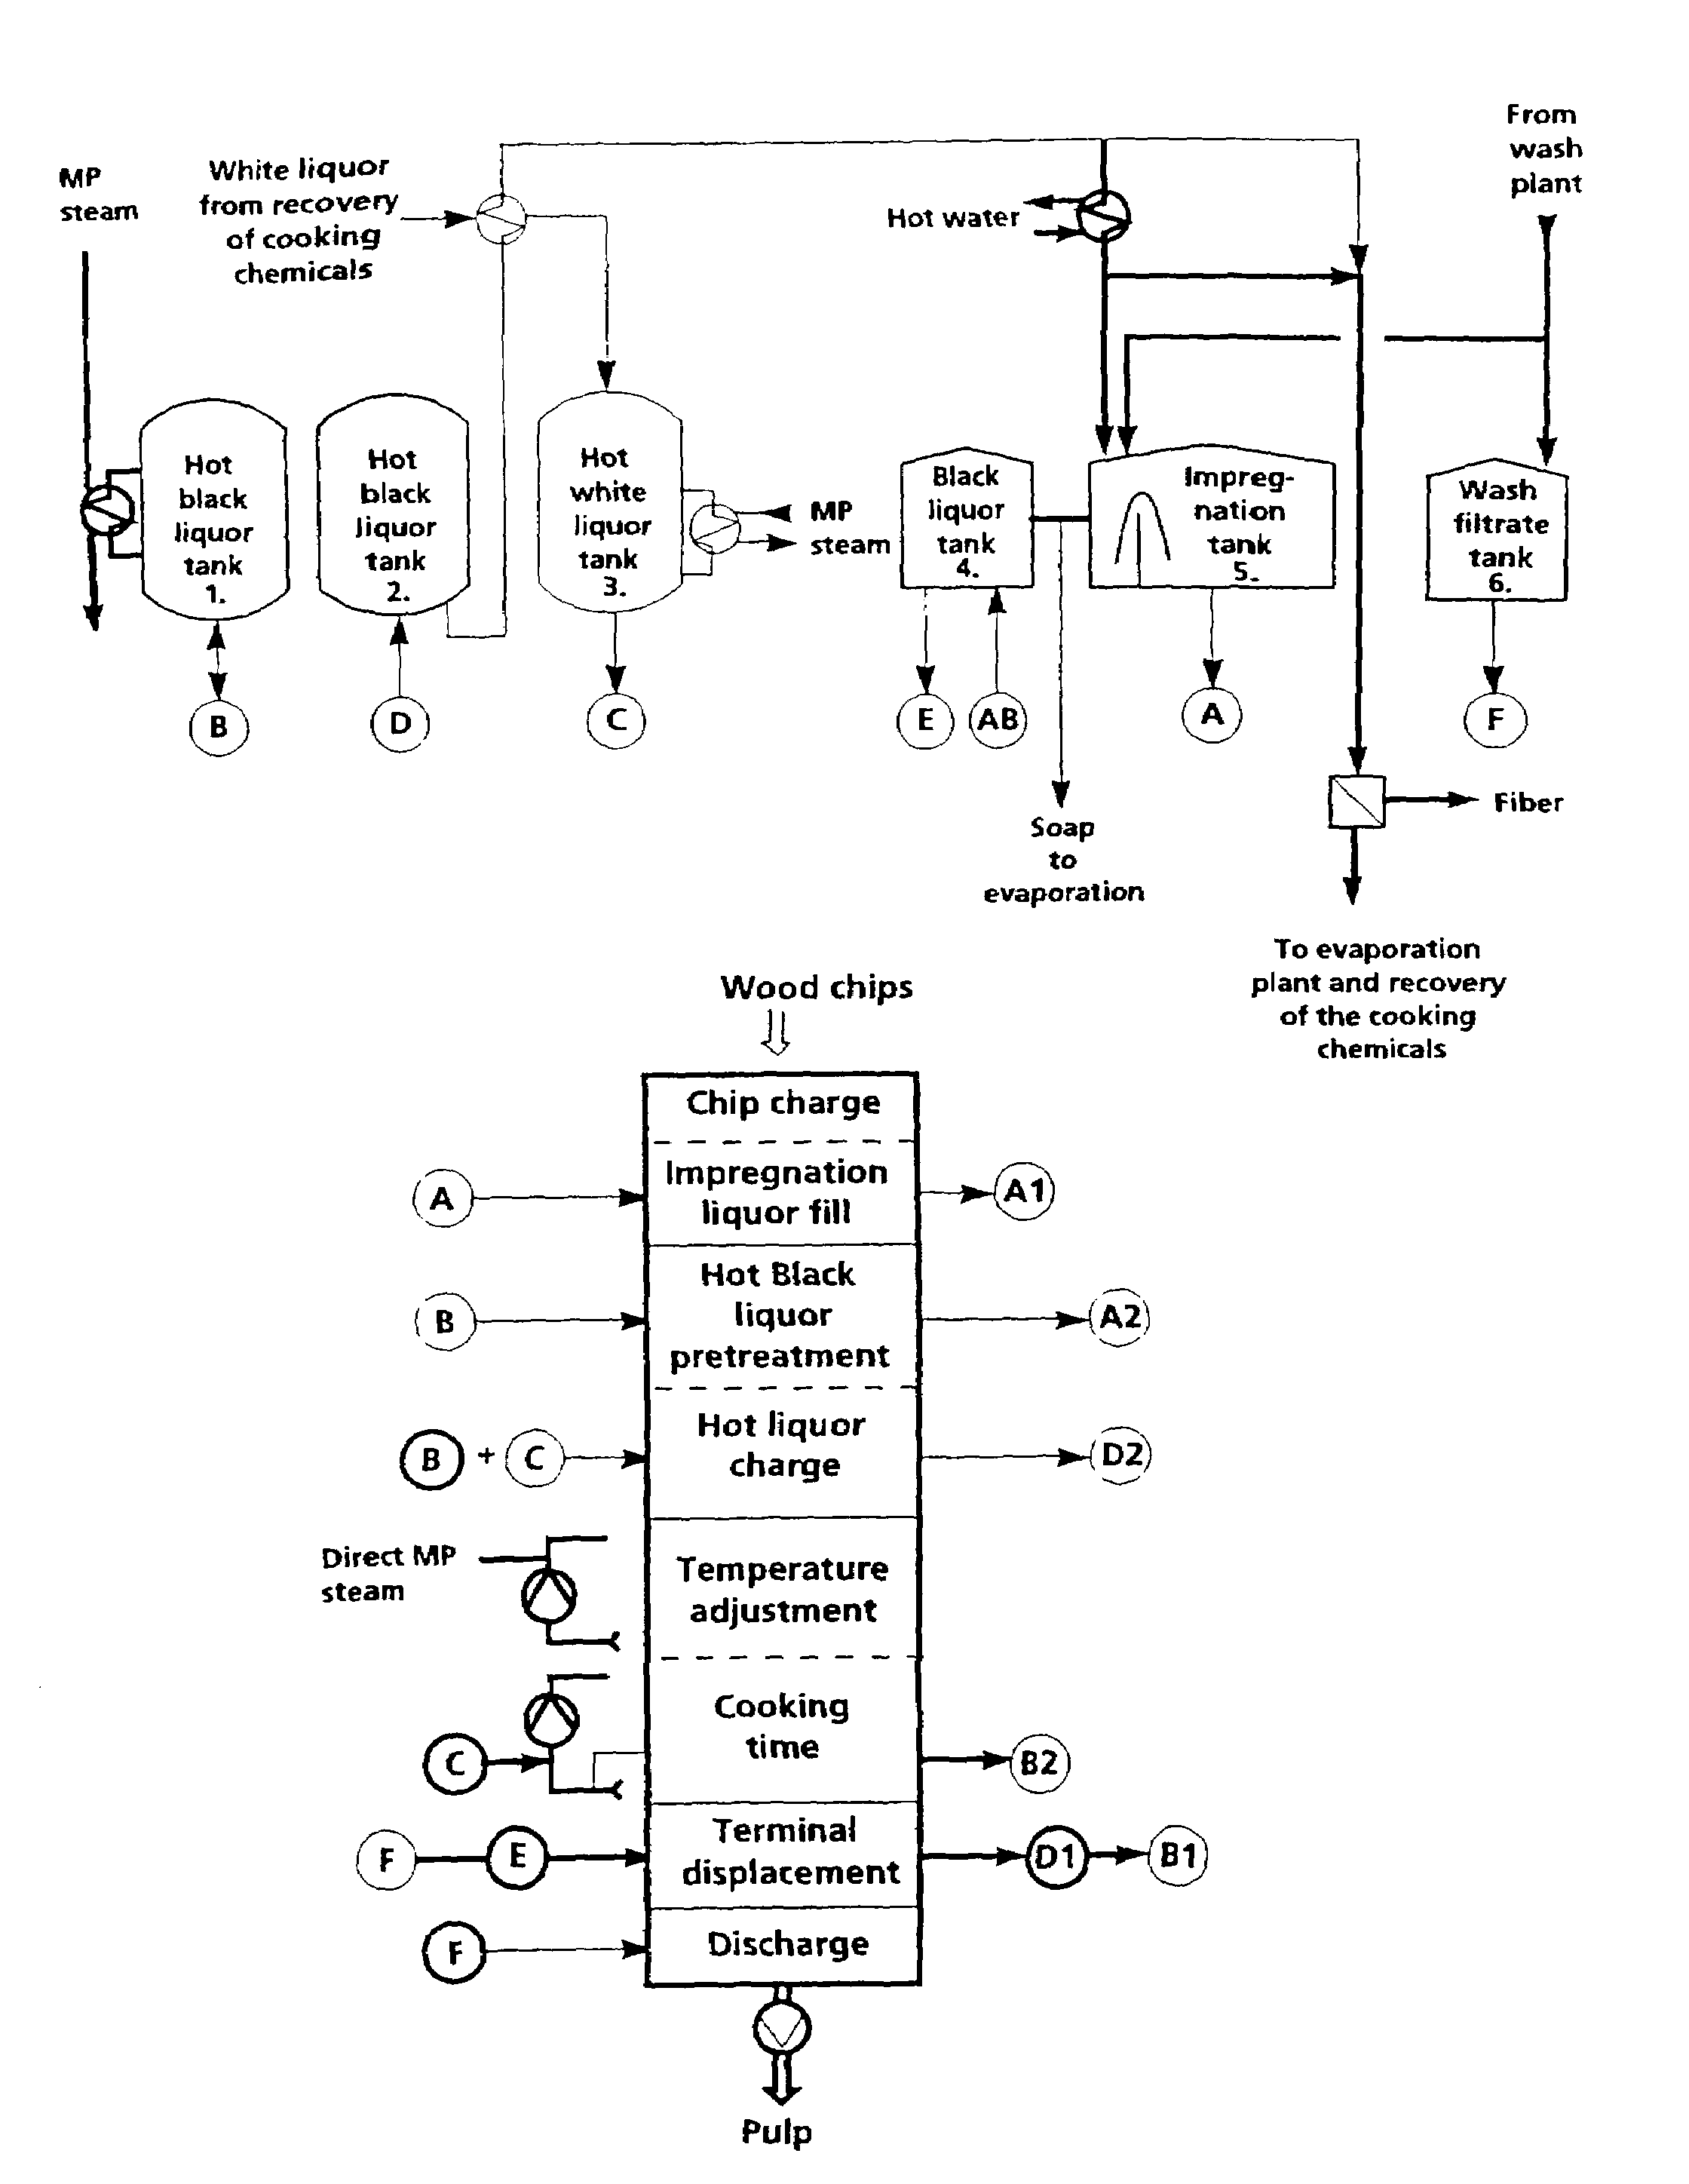 Batch process for producing chemical pulp by removing and reintroducing calcium-containing spent liquor in the digester